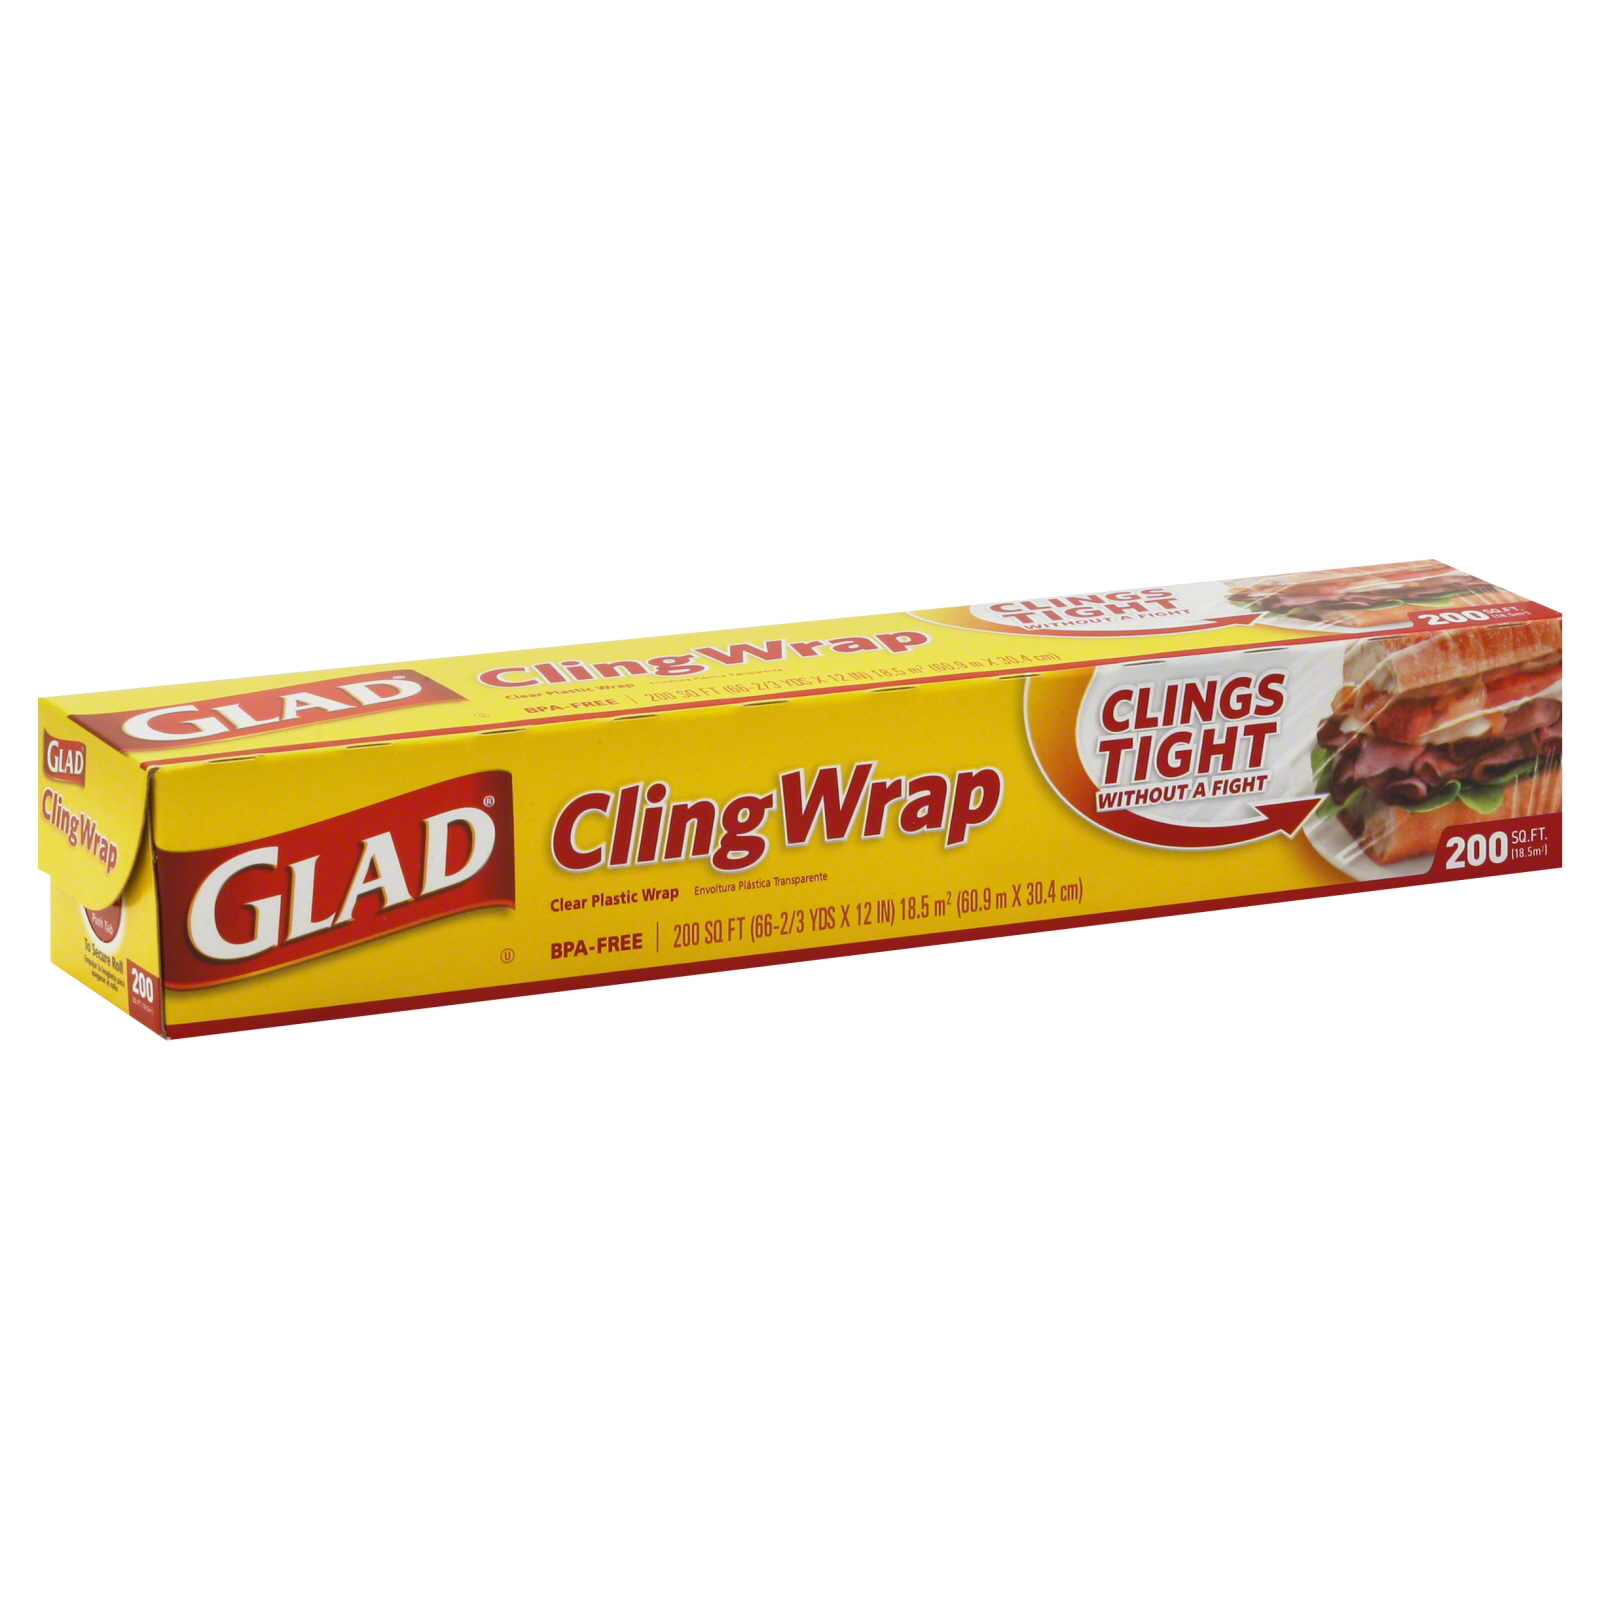 Glad Cling Wrap Clear Plastic Wrap, 200 Sq Ft, 1 roll